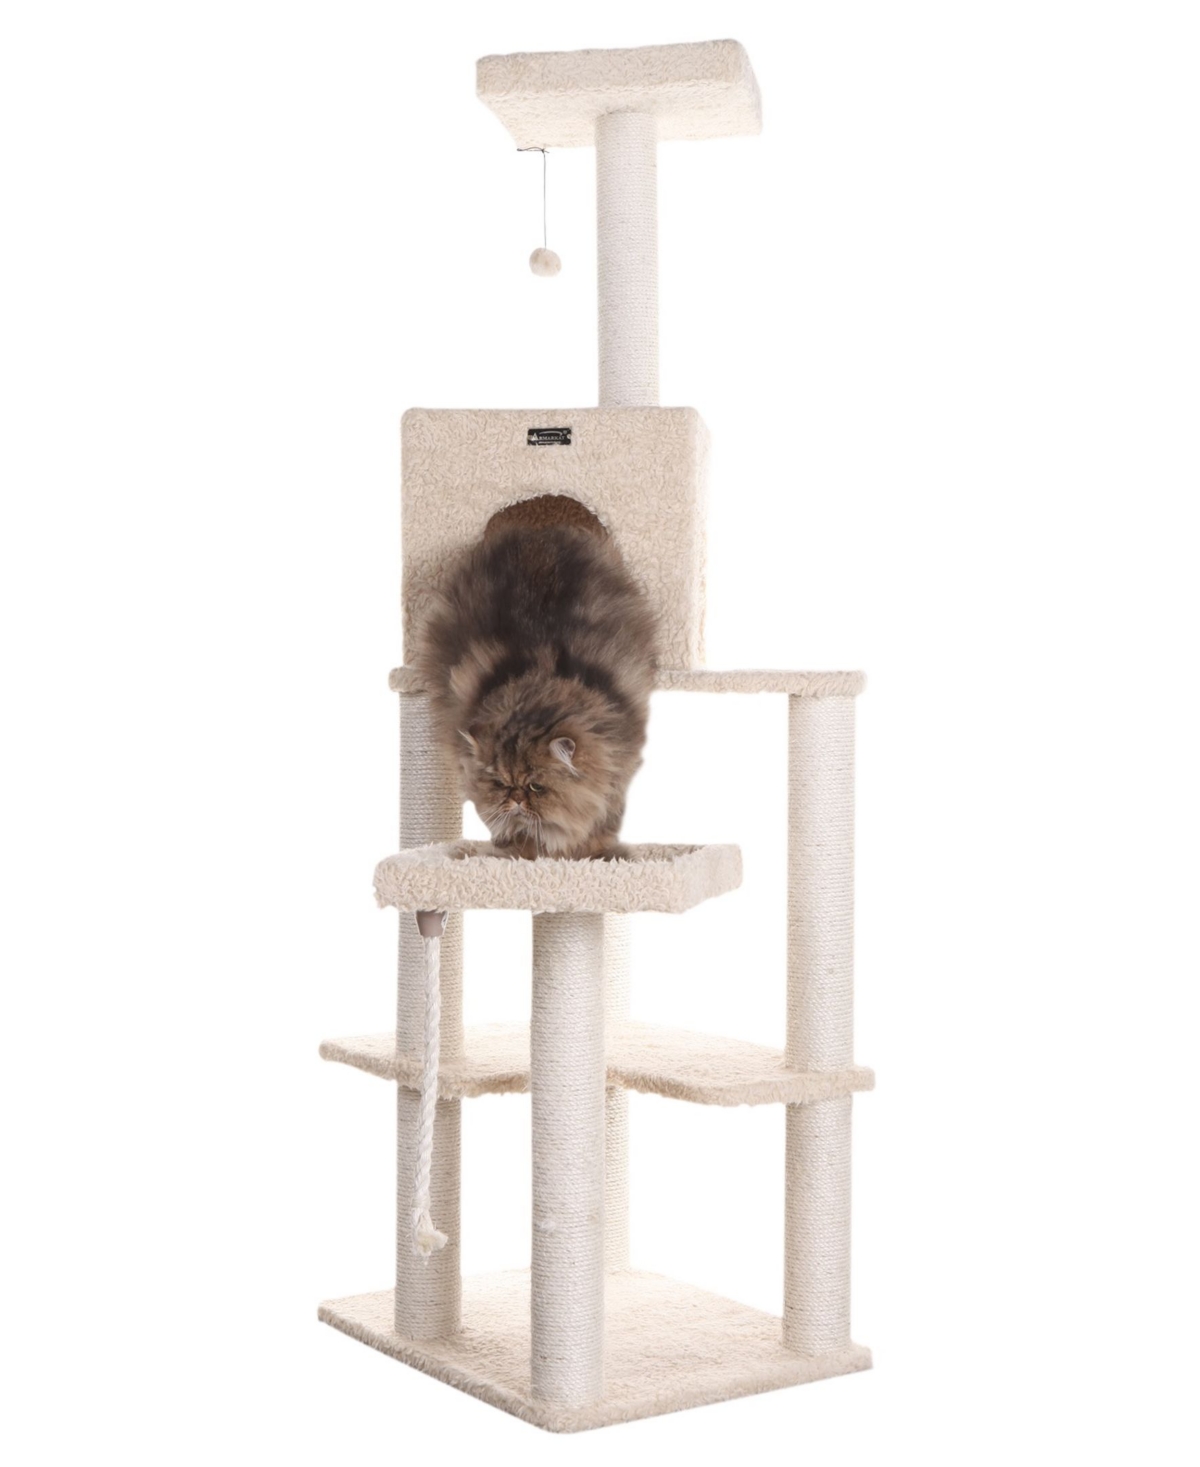 Real Wood Cat Tower, Ultra Thick Faux Fur Covered Cat Condo - Beige